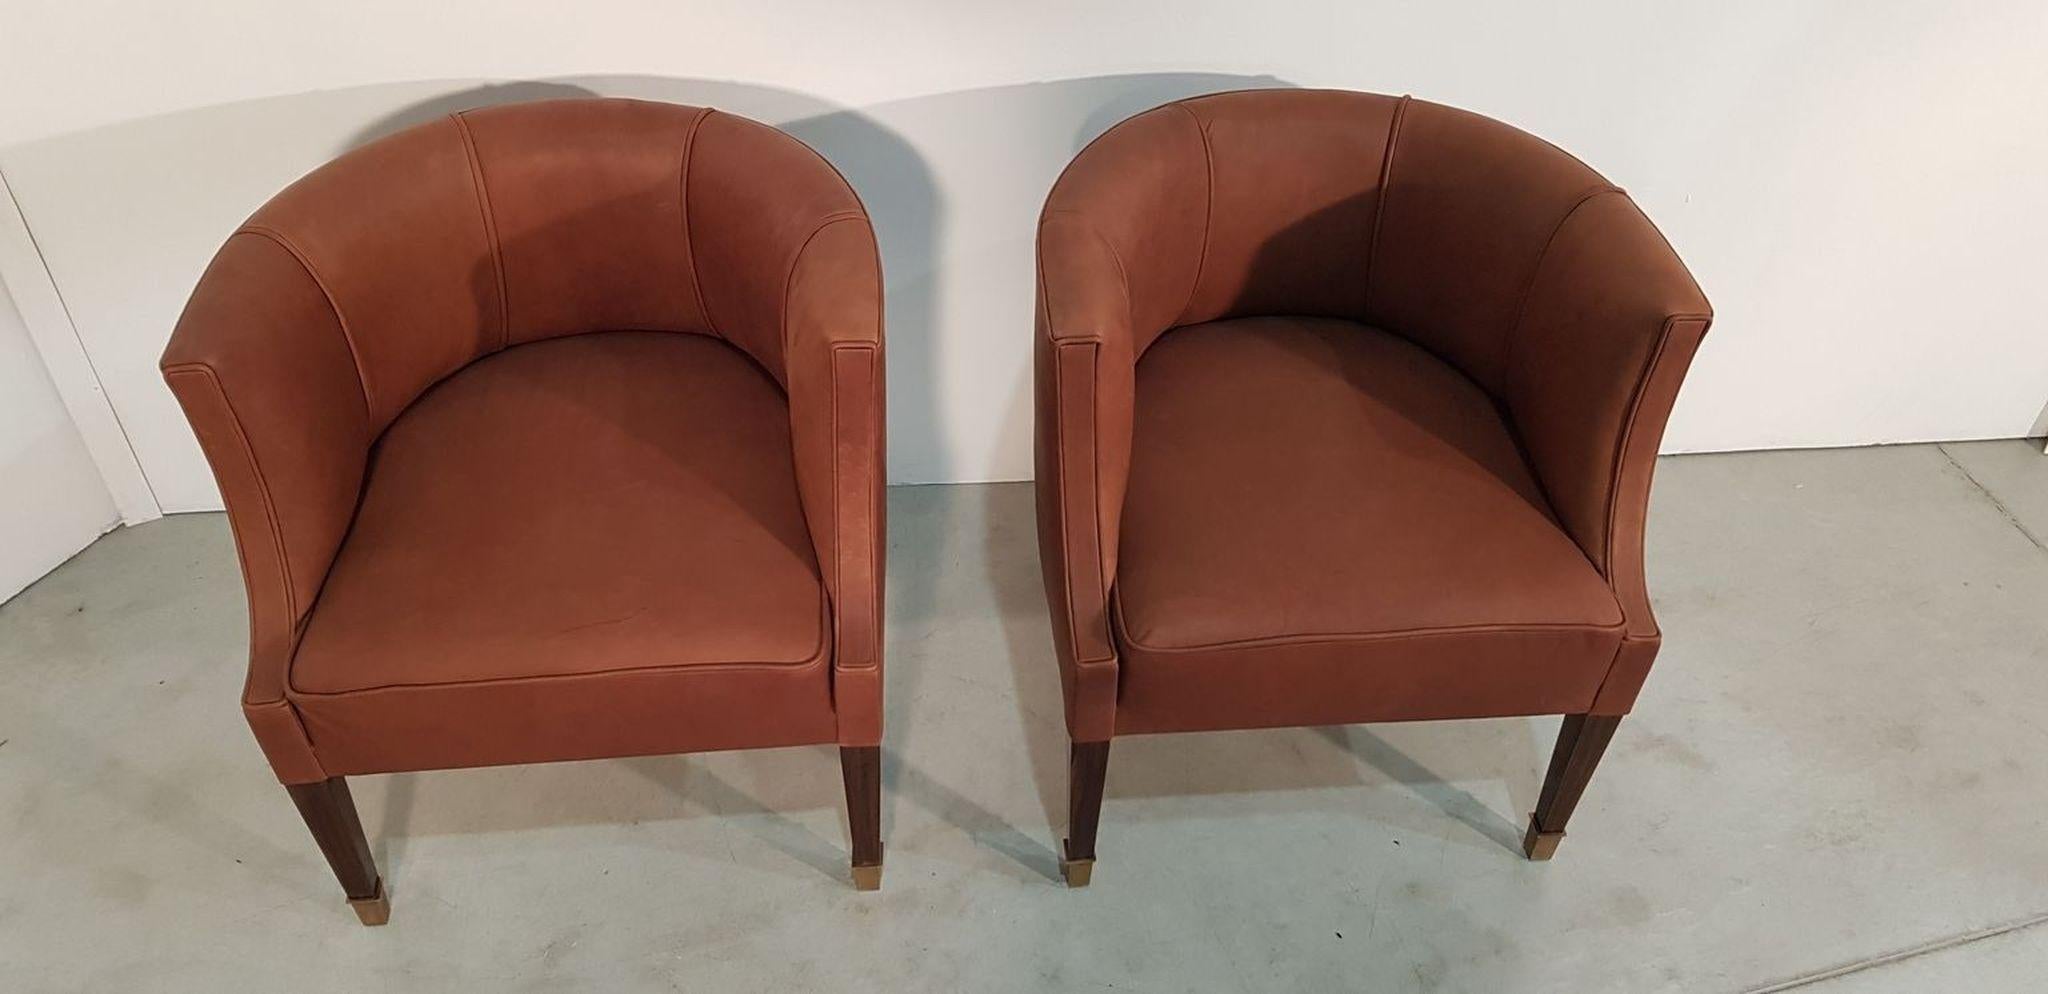 Mid-20th Century Pair of Art Deco Armchairs on Walnut Legs Covered Brown Leather, Hungary, 1930s For Sale